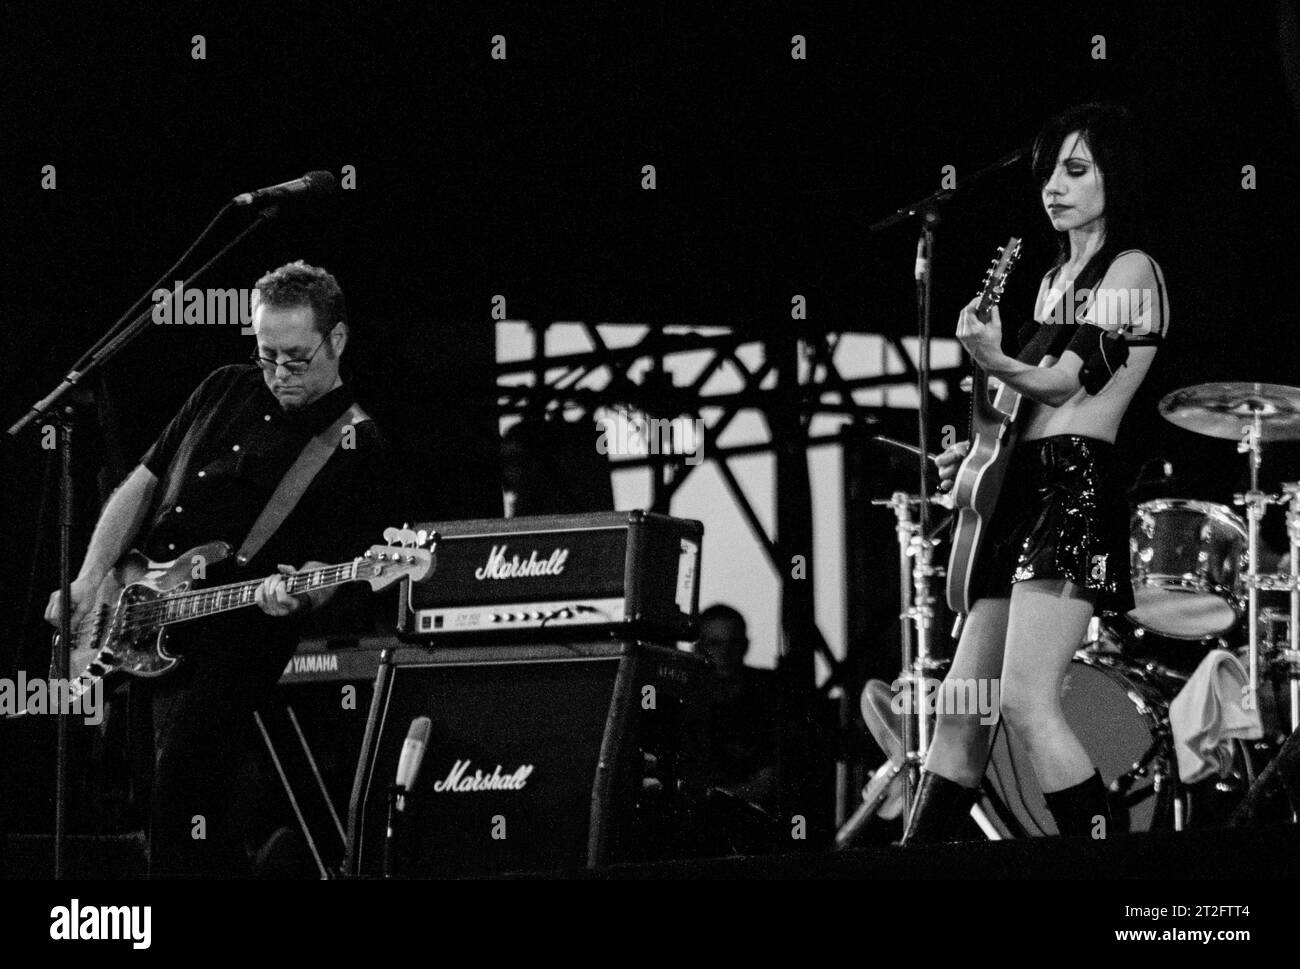 PJ HARVEY, READING FESTIVAL, 2001: PJ Harvey plays the Main Stage at Reading Festival, England, UK, August 24 2001. Photo: ROB WATKINS.   INFO: PJ Harvey is an acclaimed British singer-songwriter and musician known for her distinctive voice and eclectic style. With multiple awards, including the Mercury Prize, her influential work spans rock, punk, and alternative genres, making her a pivotal figure in contemporary music. Stock Photo